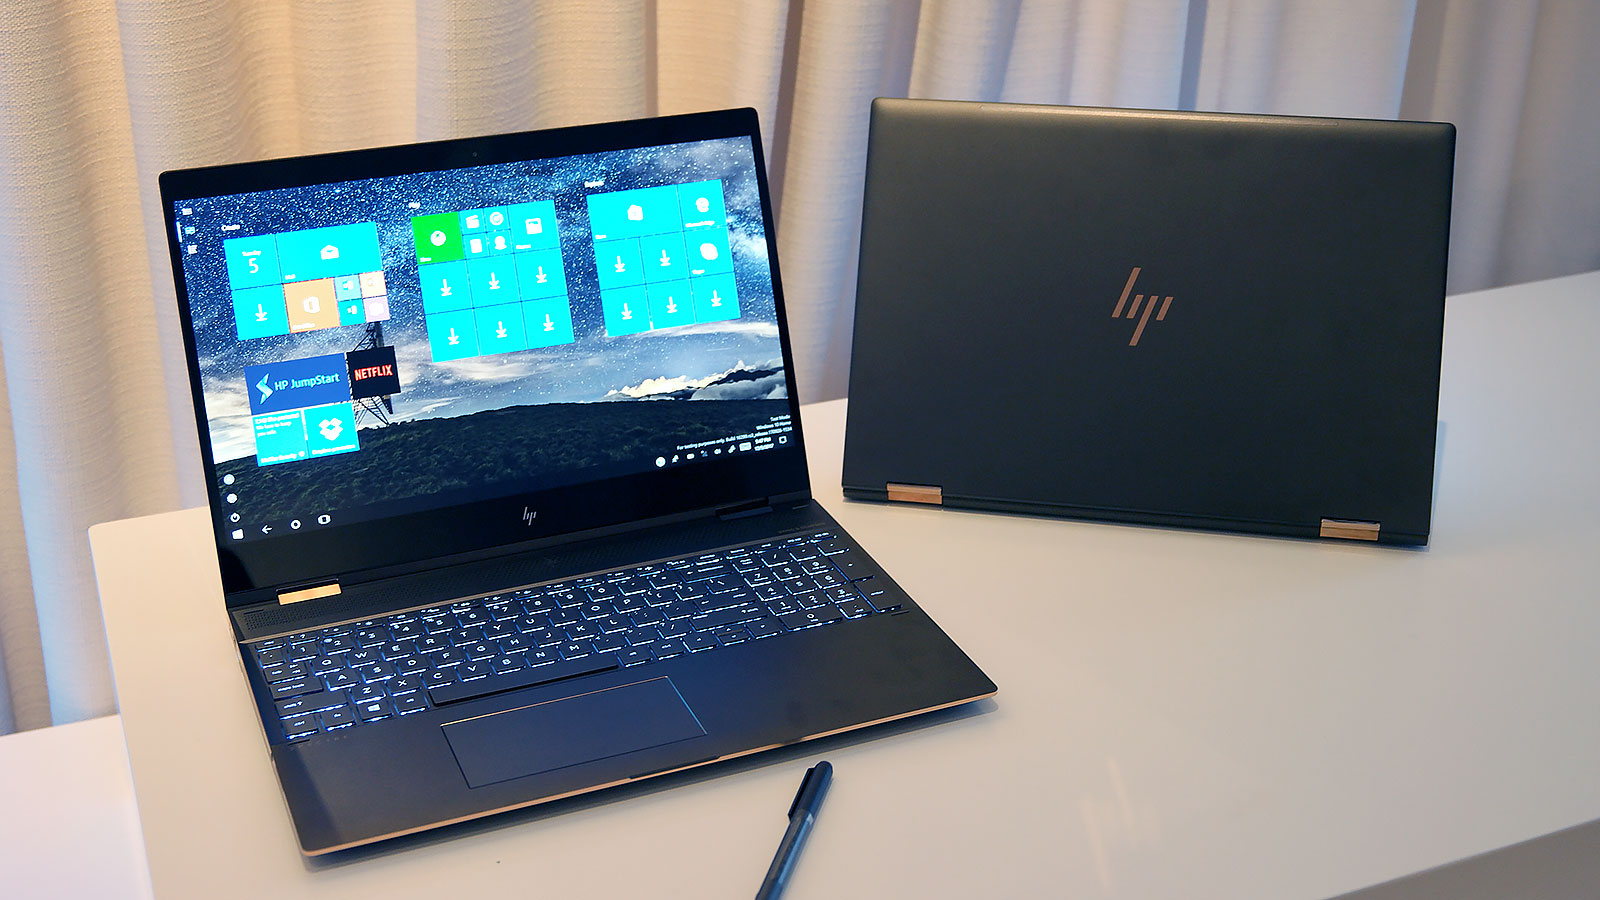 HP’s Convertible Spectre X360 15 Wants To Give You What The MacBook Pro Can’t